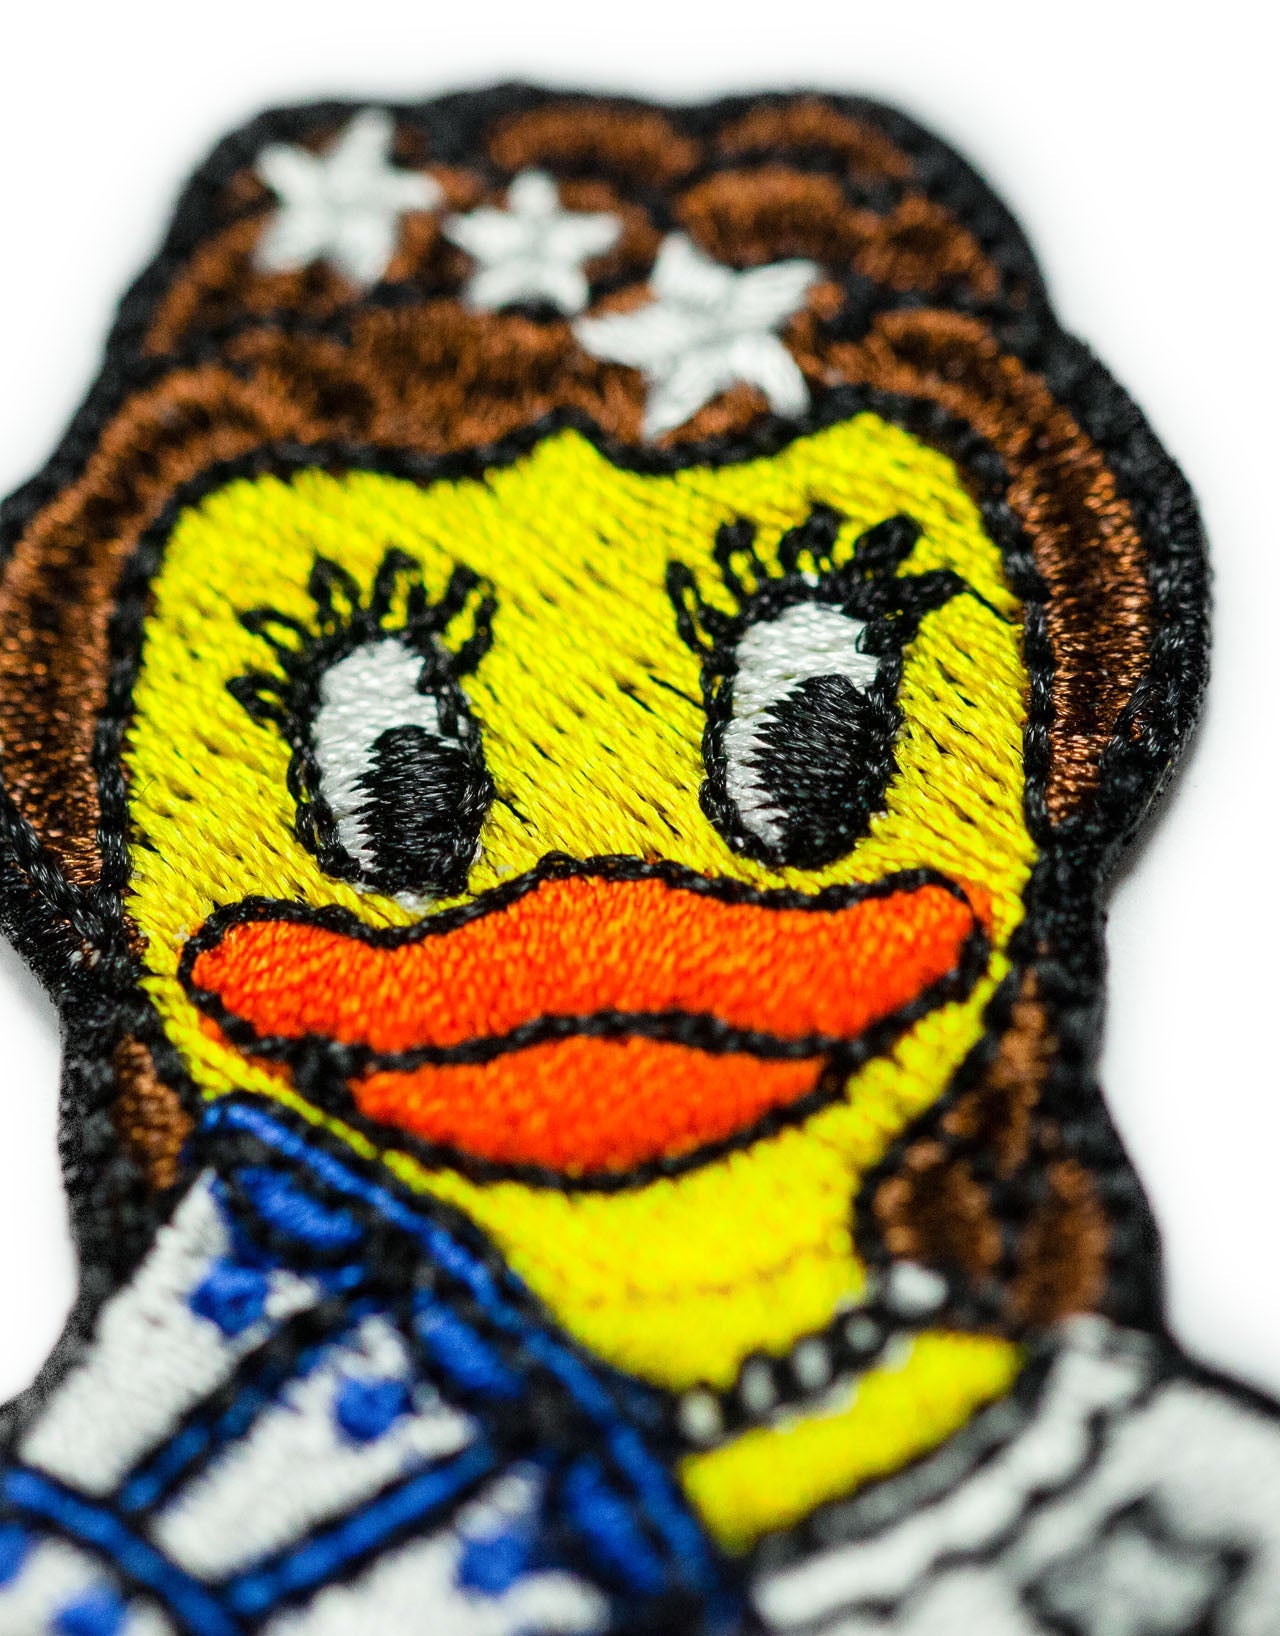 Patch Canard Sissi